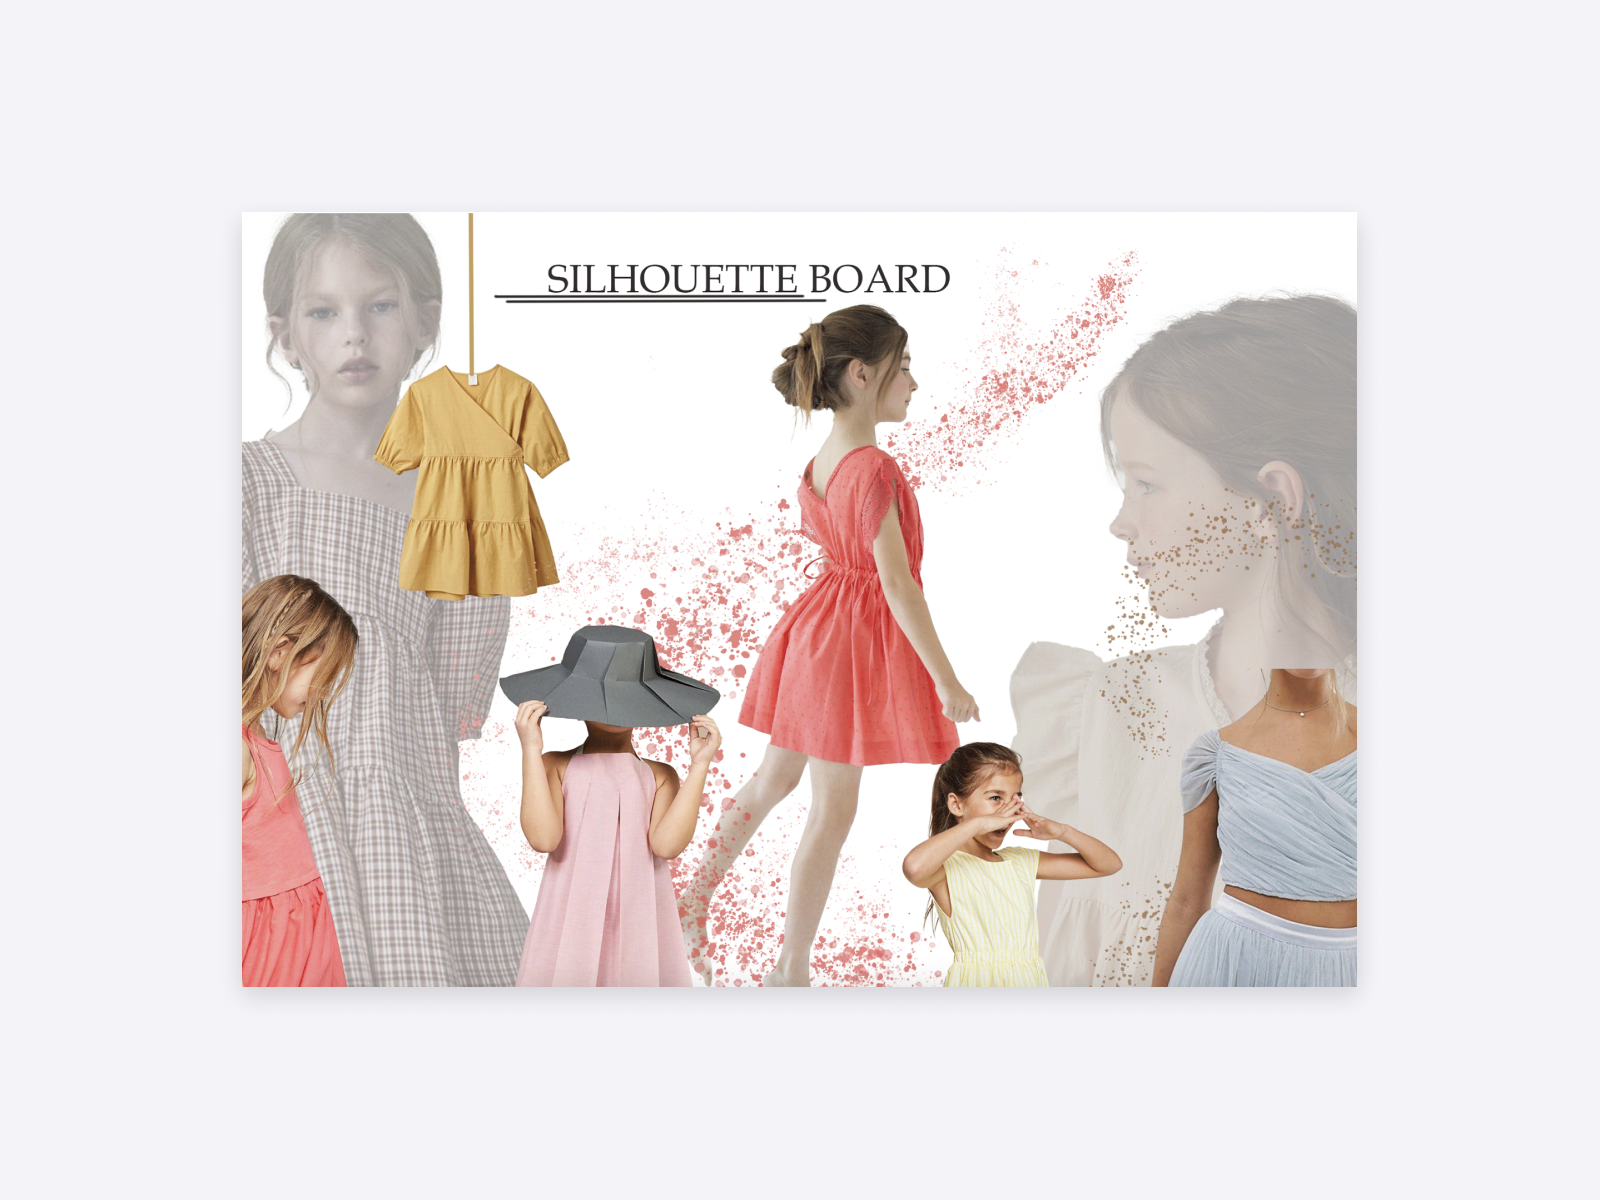 A silhouette board, modeling with a young girl, in different dresses.